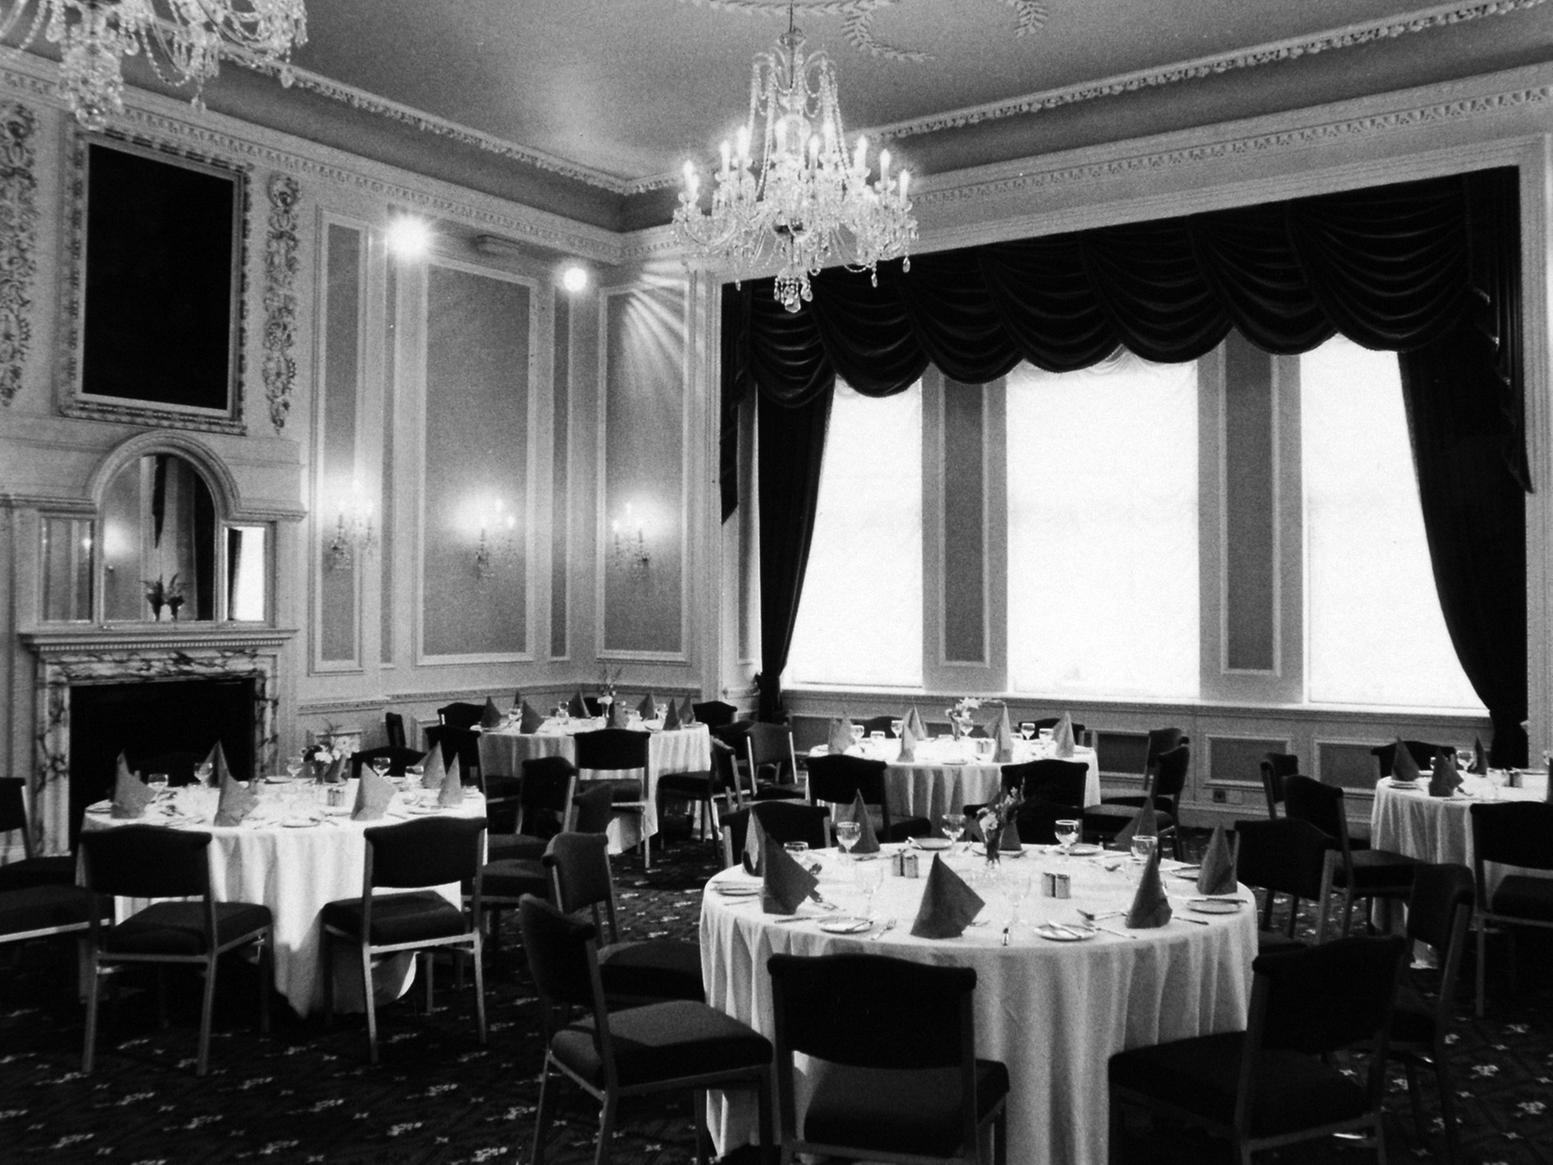 Do you recognise here? It's the sumptuous banqueting suite at The Wellesley Hotel in Leeds city centre.